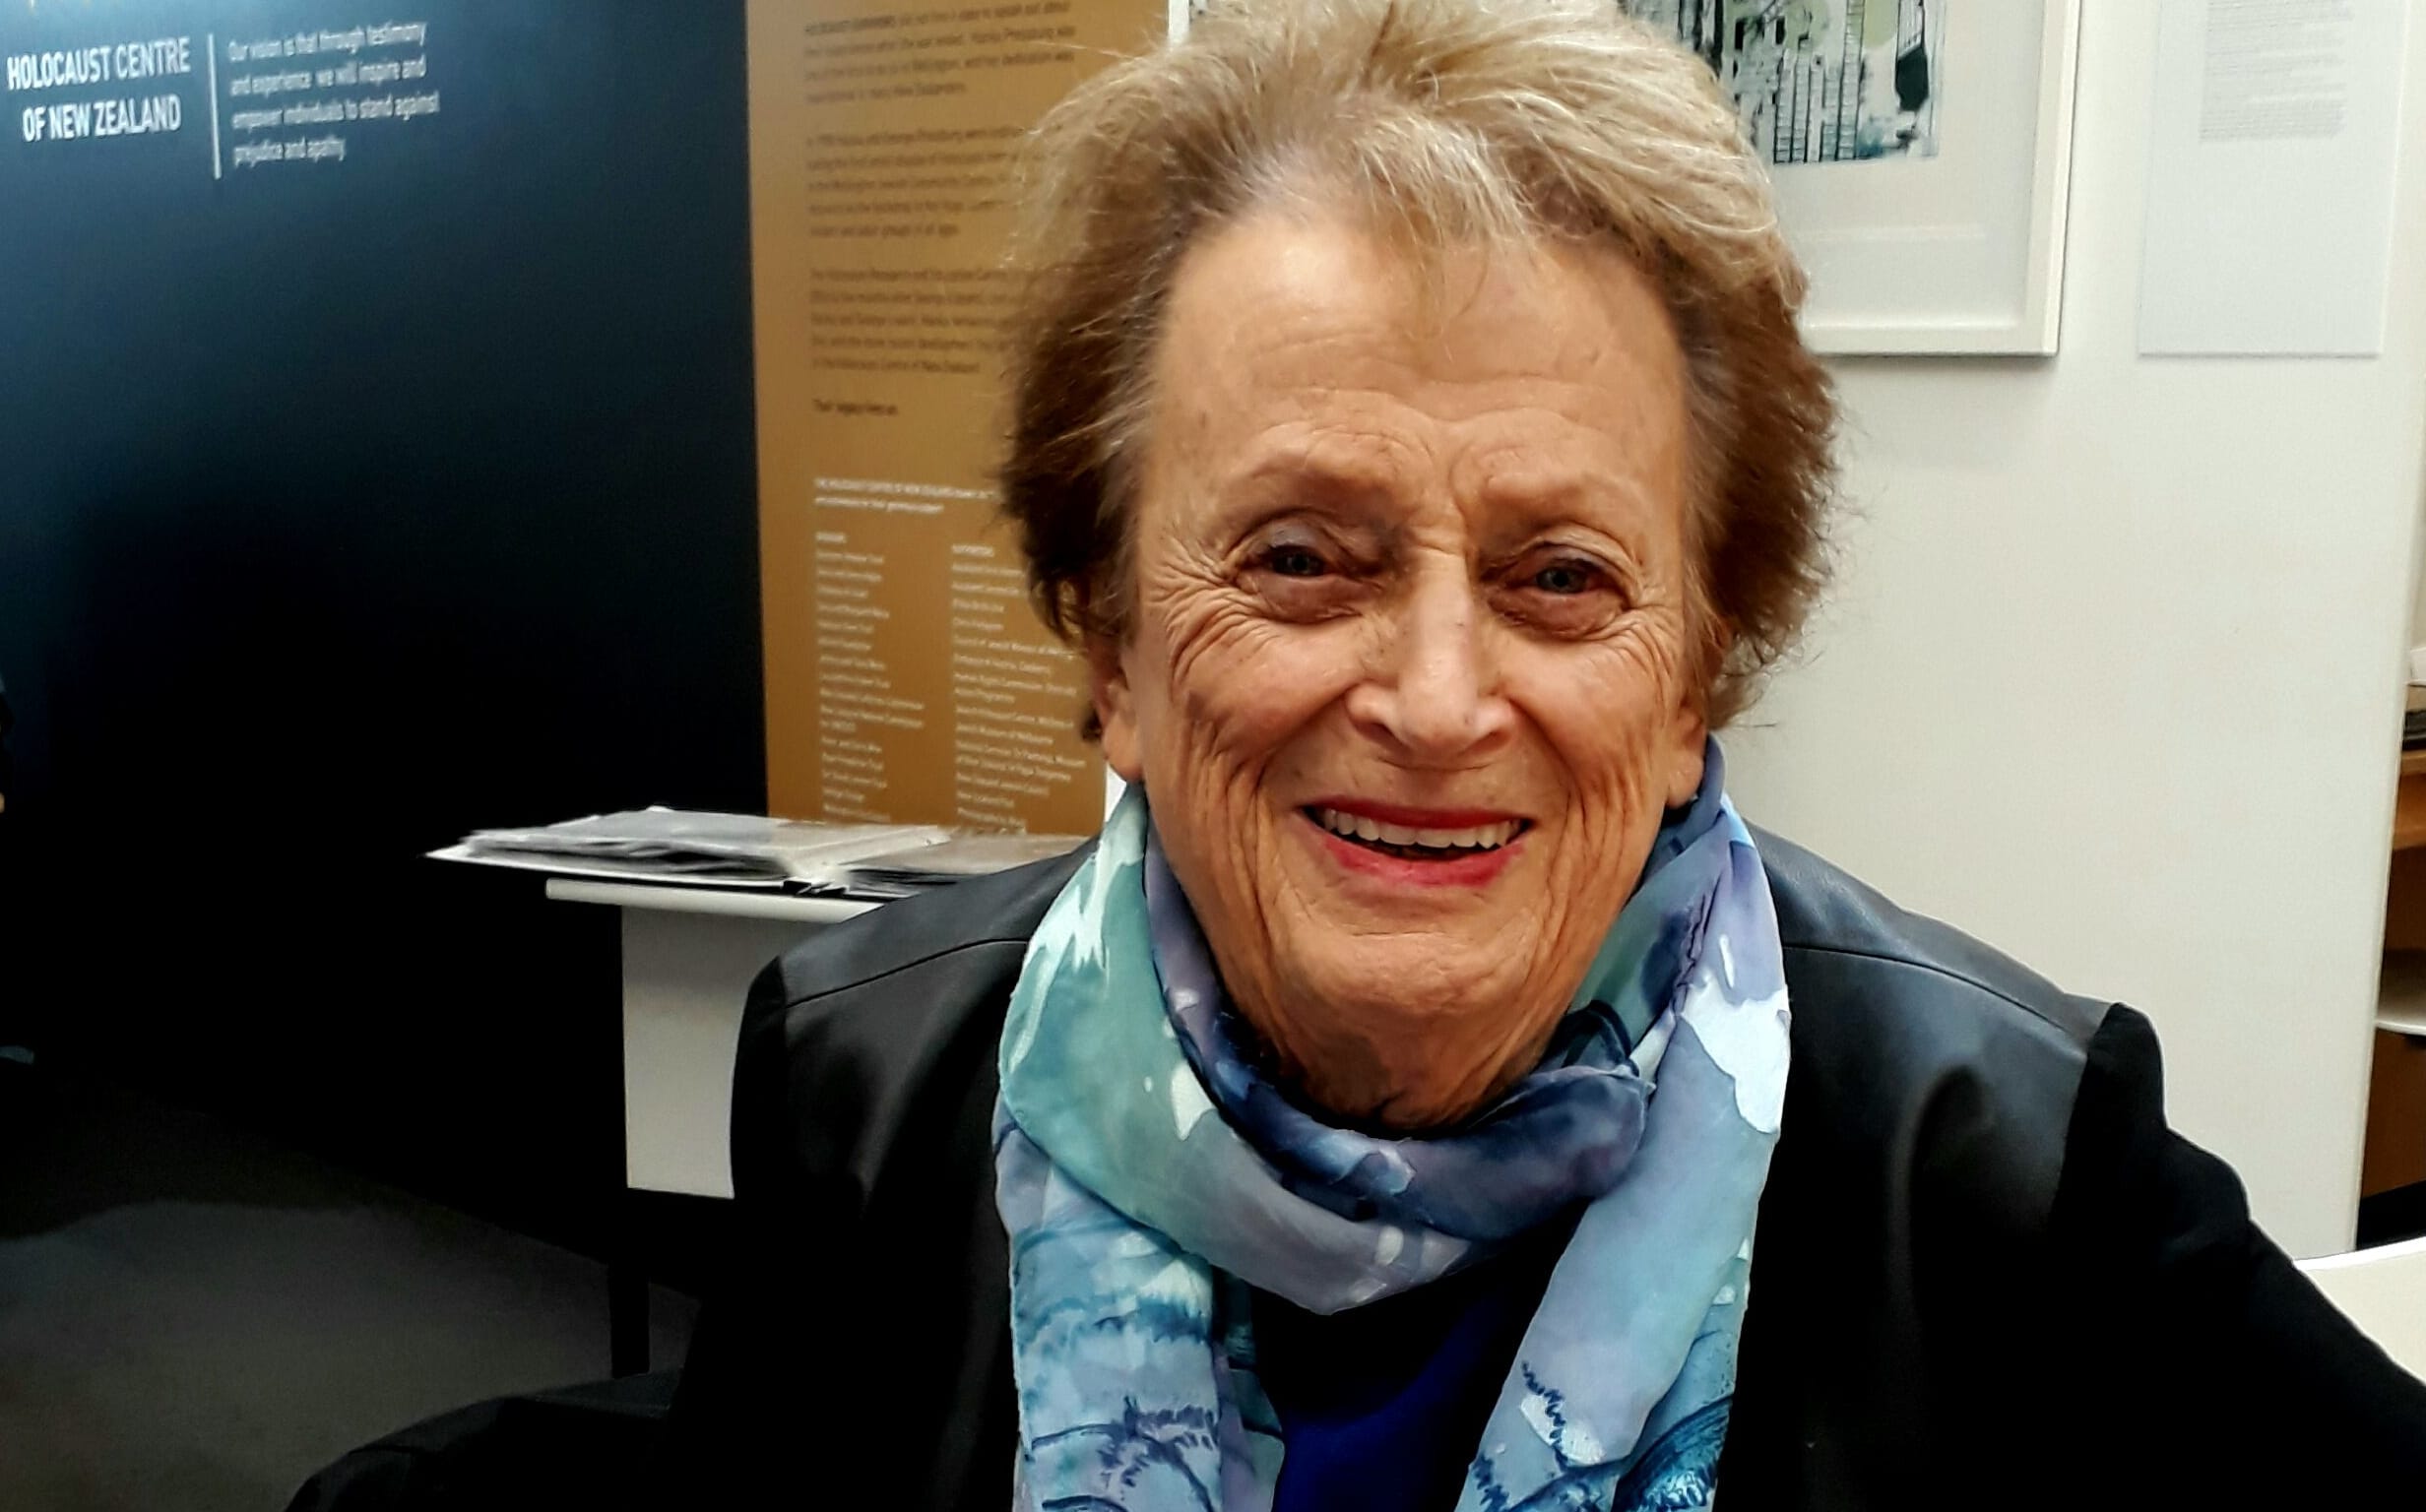 Inge Wolf, Director of Holocaust Centre of New Zealand